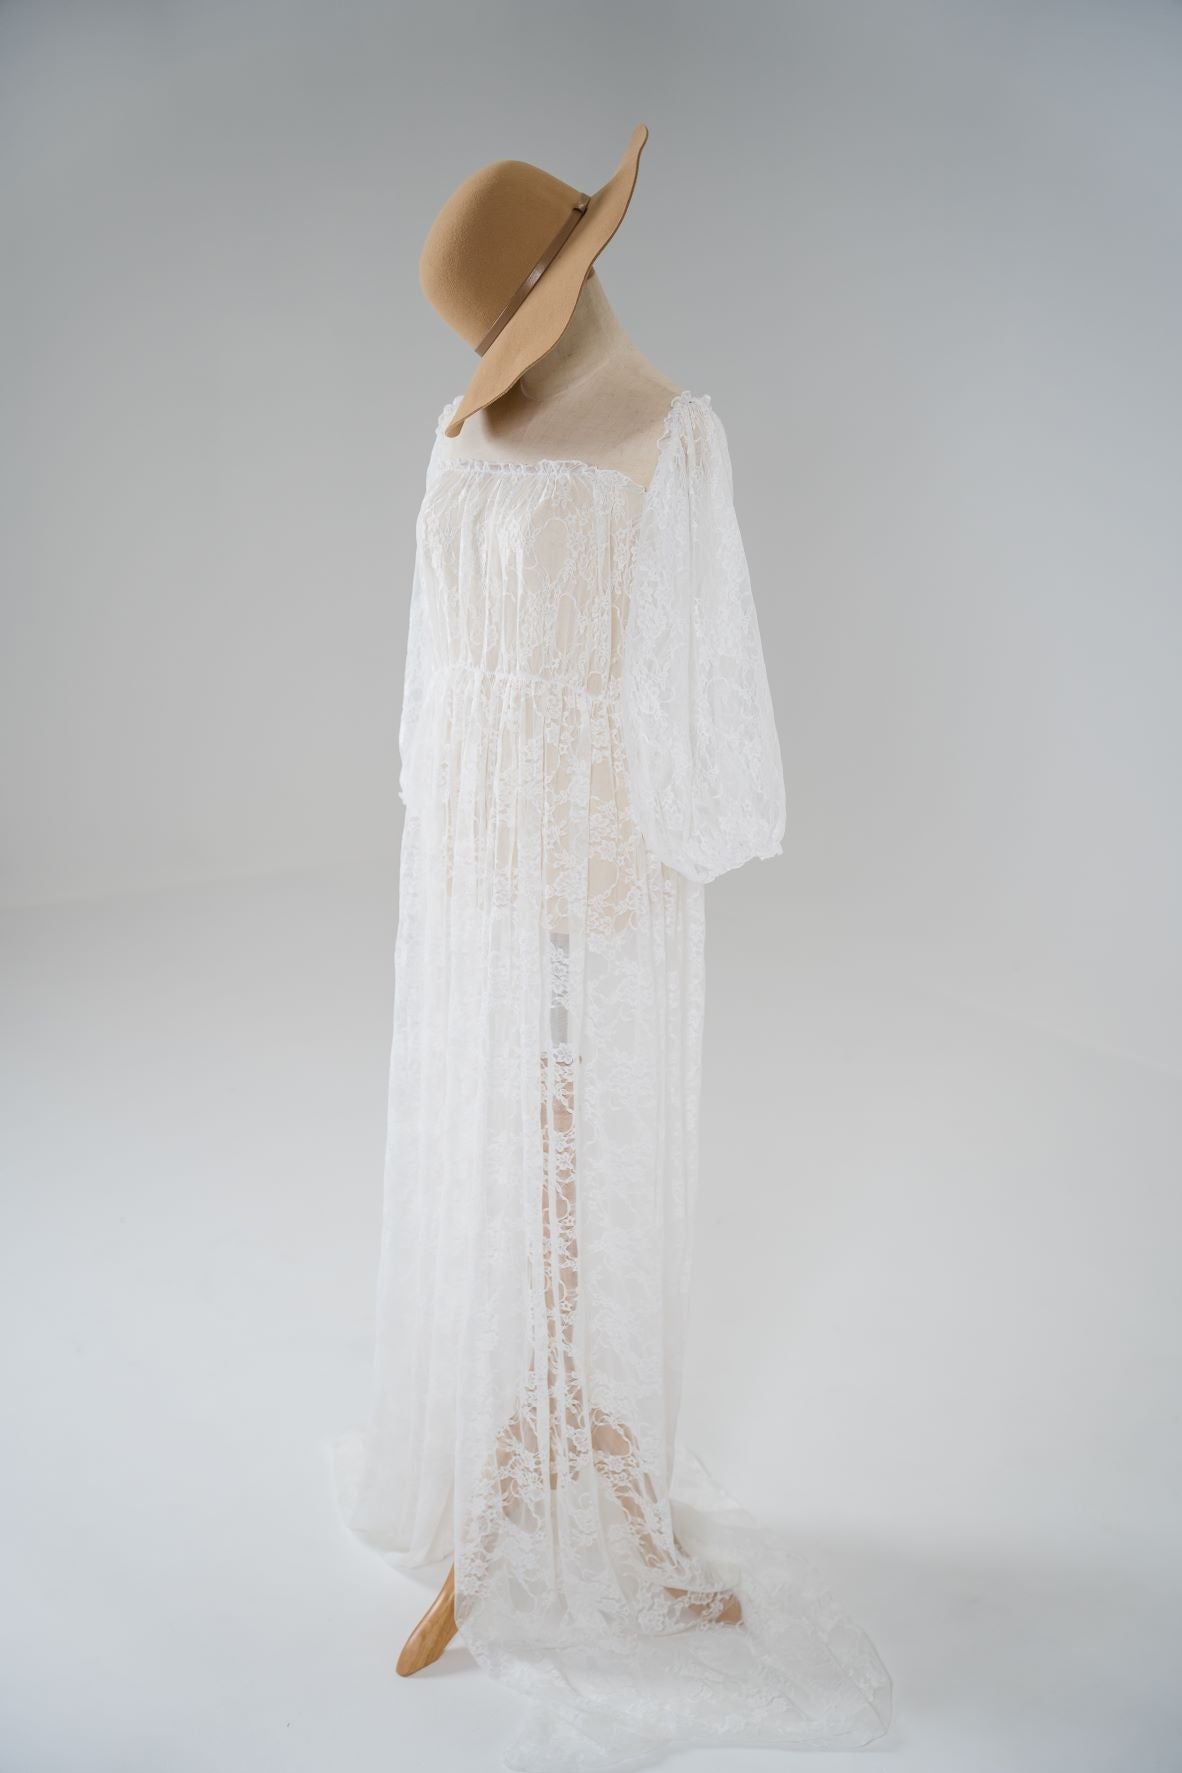 Dress Hire - Maternity Photoshoot Dresses - Bella - White Lace Gown - 4 DAY RENTAL - Luxe Bumps AU